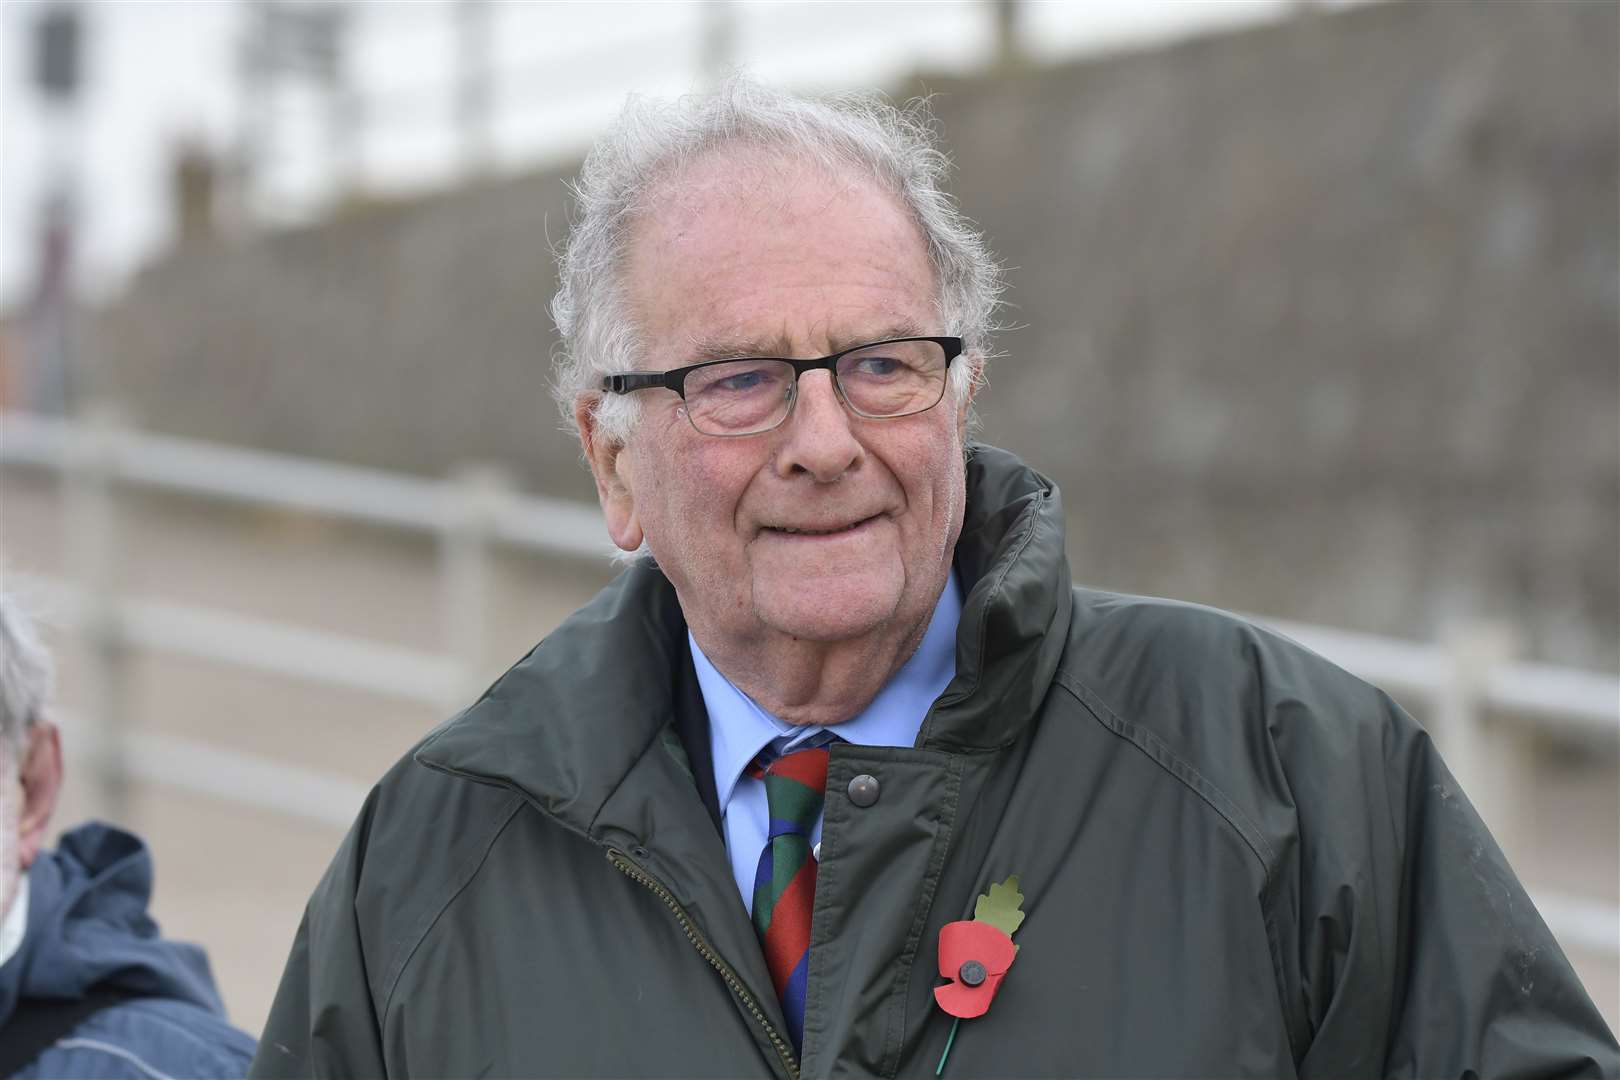 Sir Roger Gale is not a fan of the PM Picture: Tony Flashman